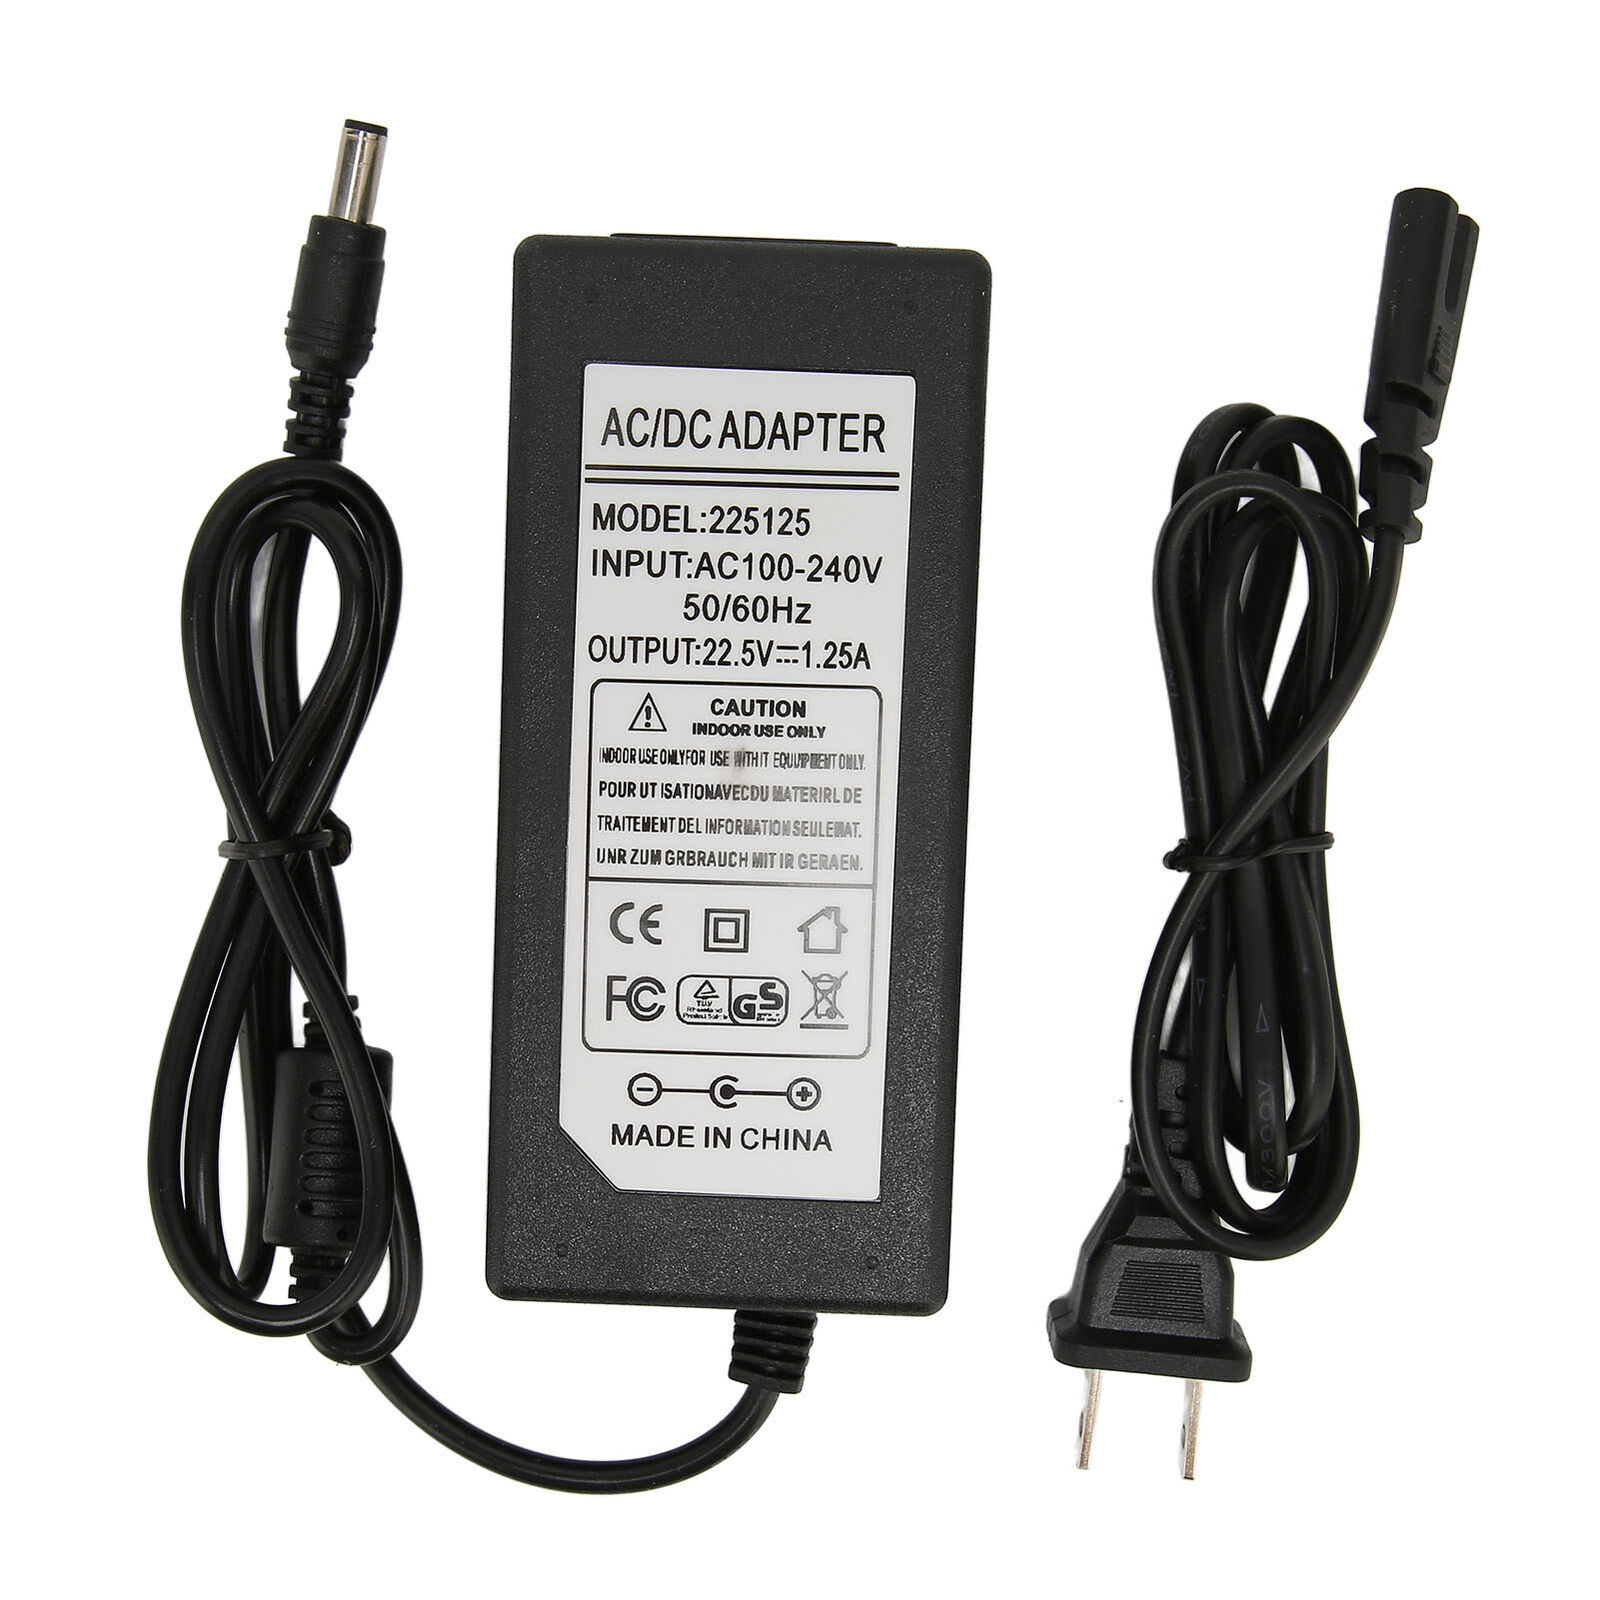 Adapter Charger Power Supply For Robot Power Supply Cleaner Equipment Brand: Unbranded Input Voltage: AC100-240V 50